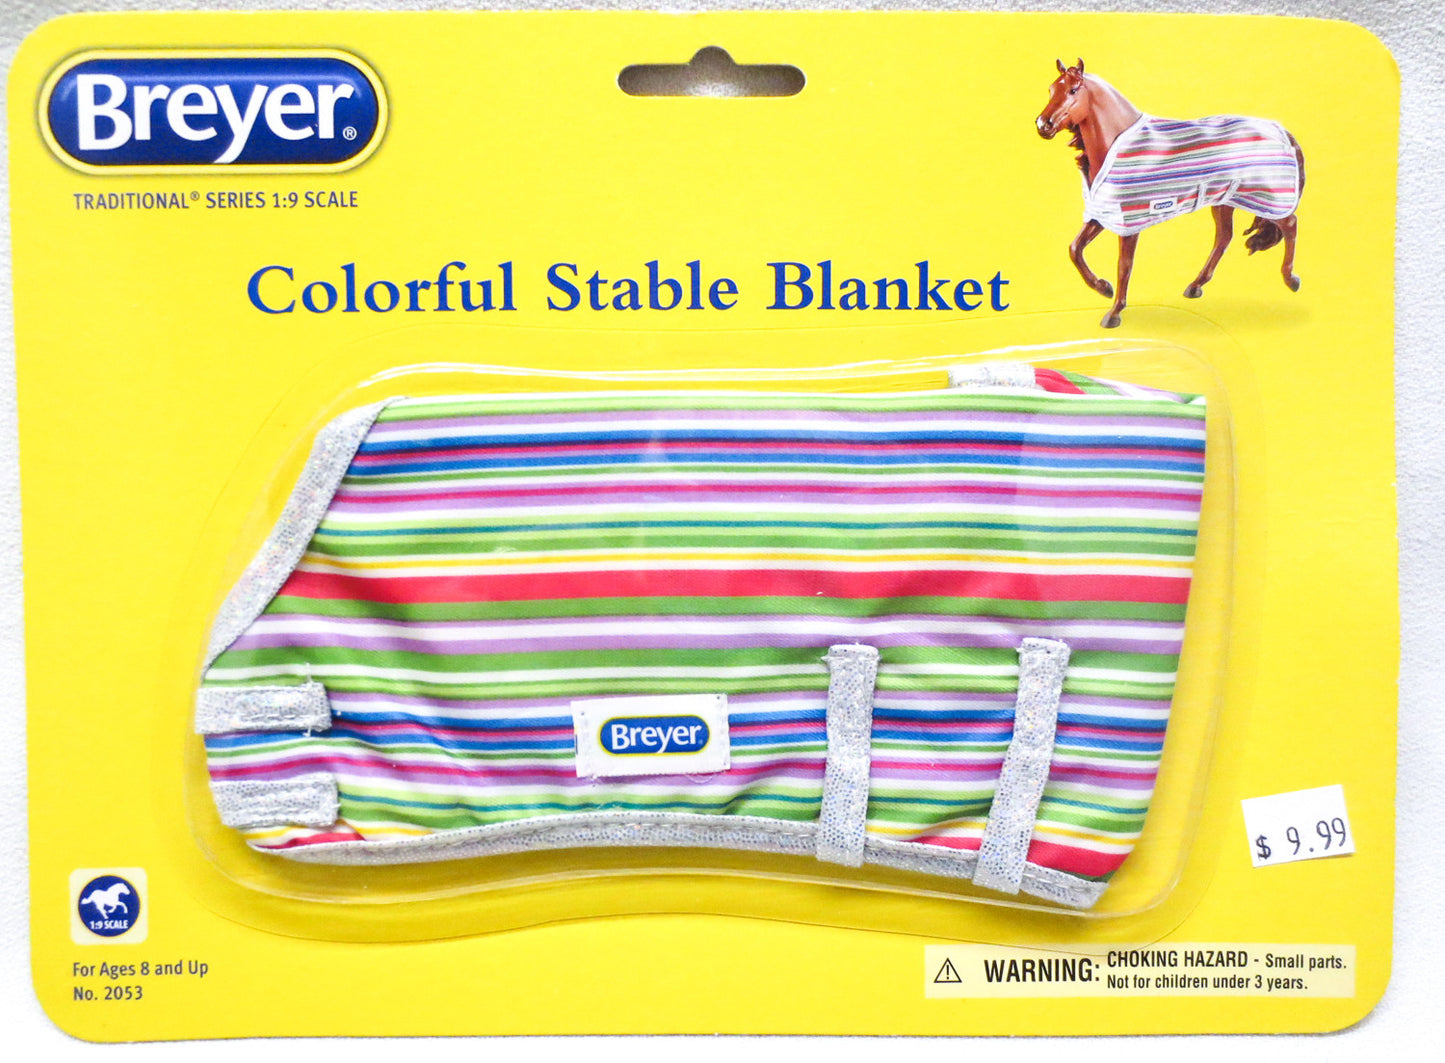 Colorful Stable Blanket - Your Choice of Patterns - triple-mountain